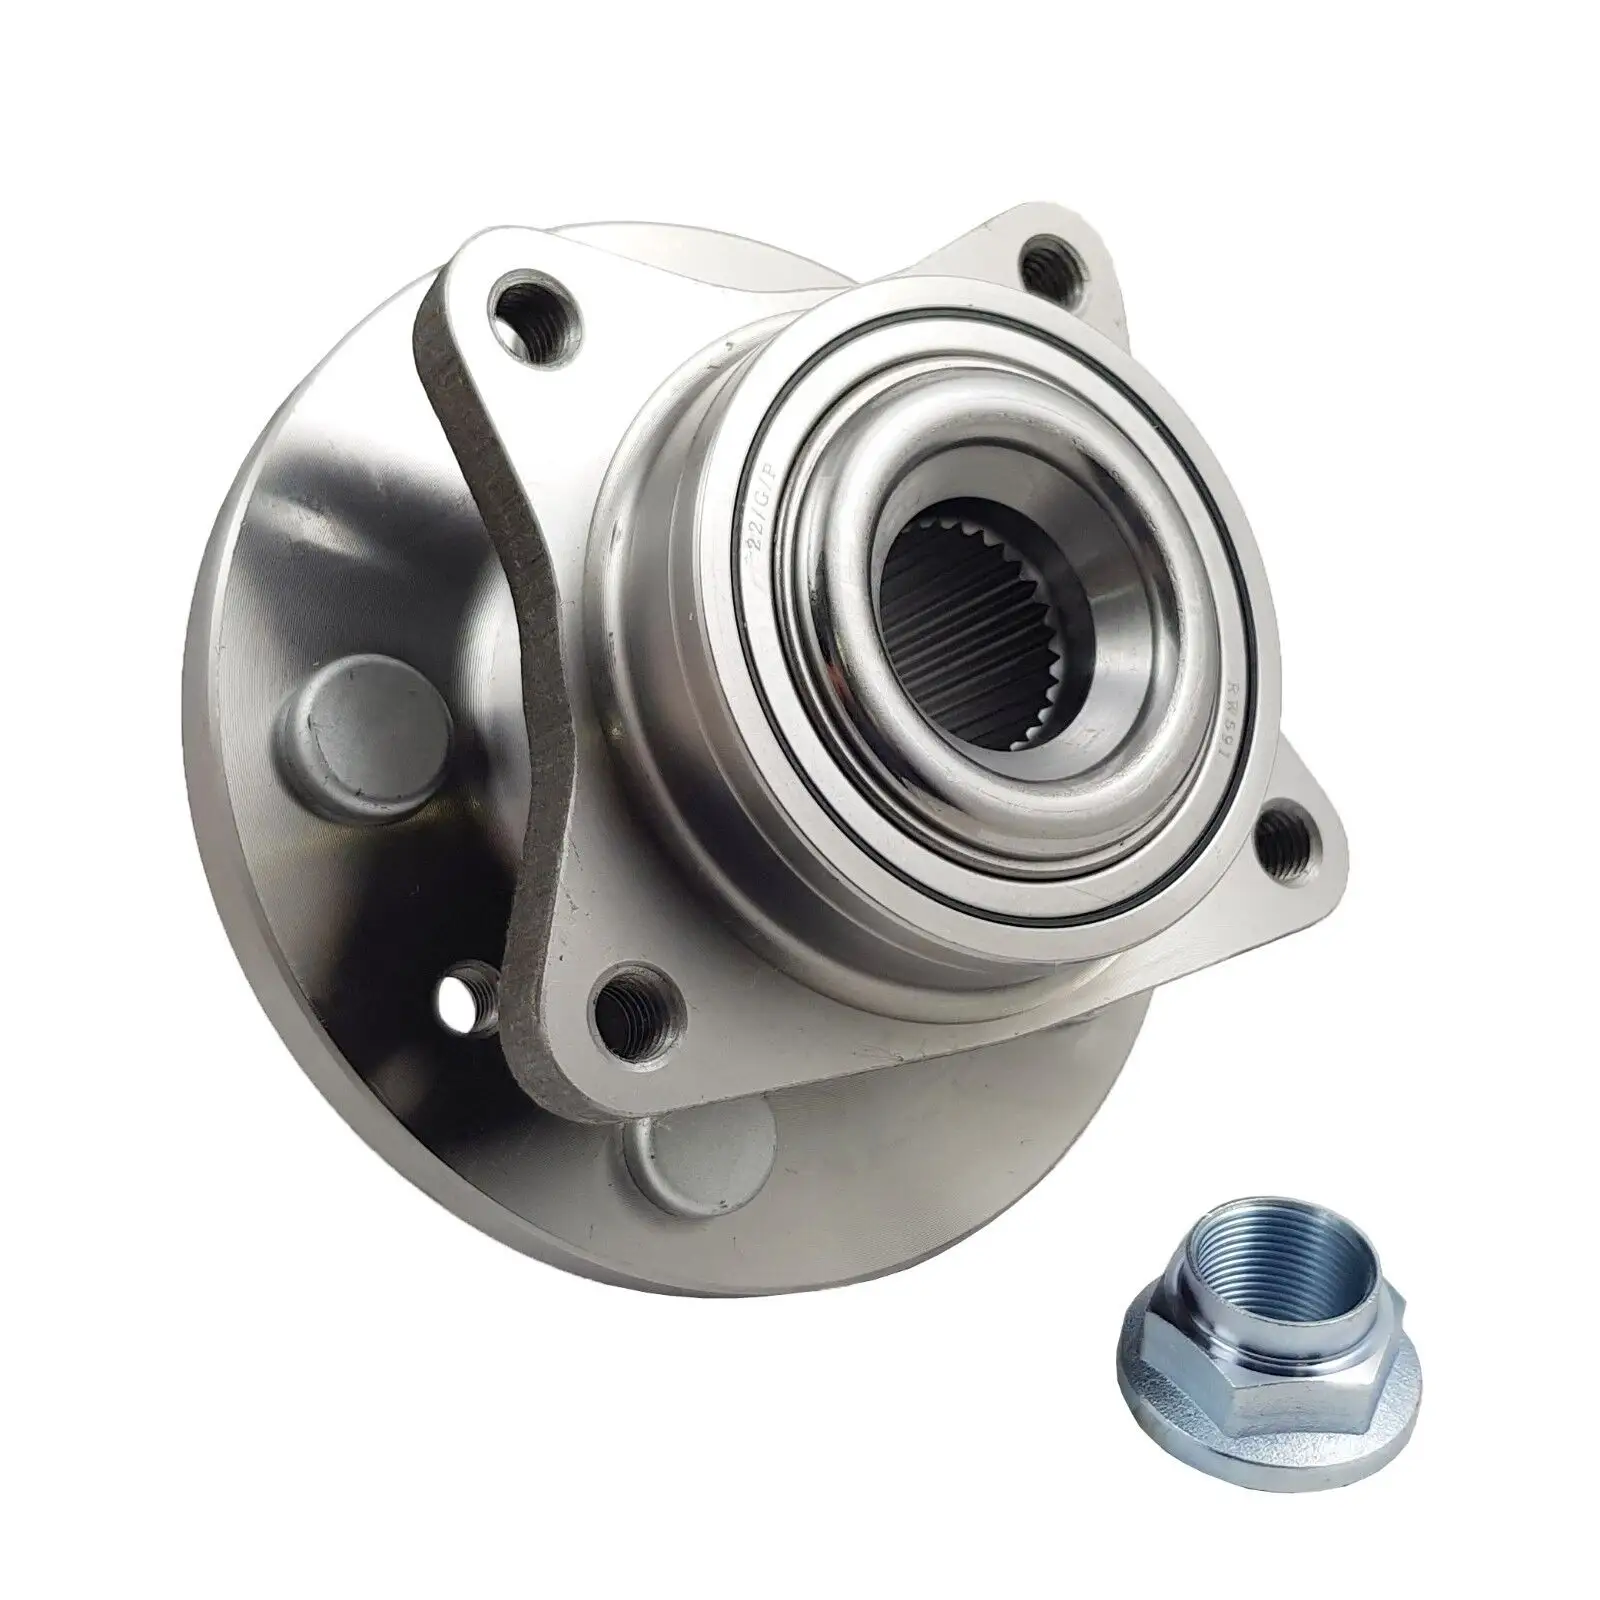 BBmart Other Auto Parts Wheel Hub Bearing For Land Rover DISCOVERY IV L319 RANGE ROVER SPORT L320 OE LR014147